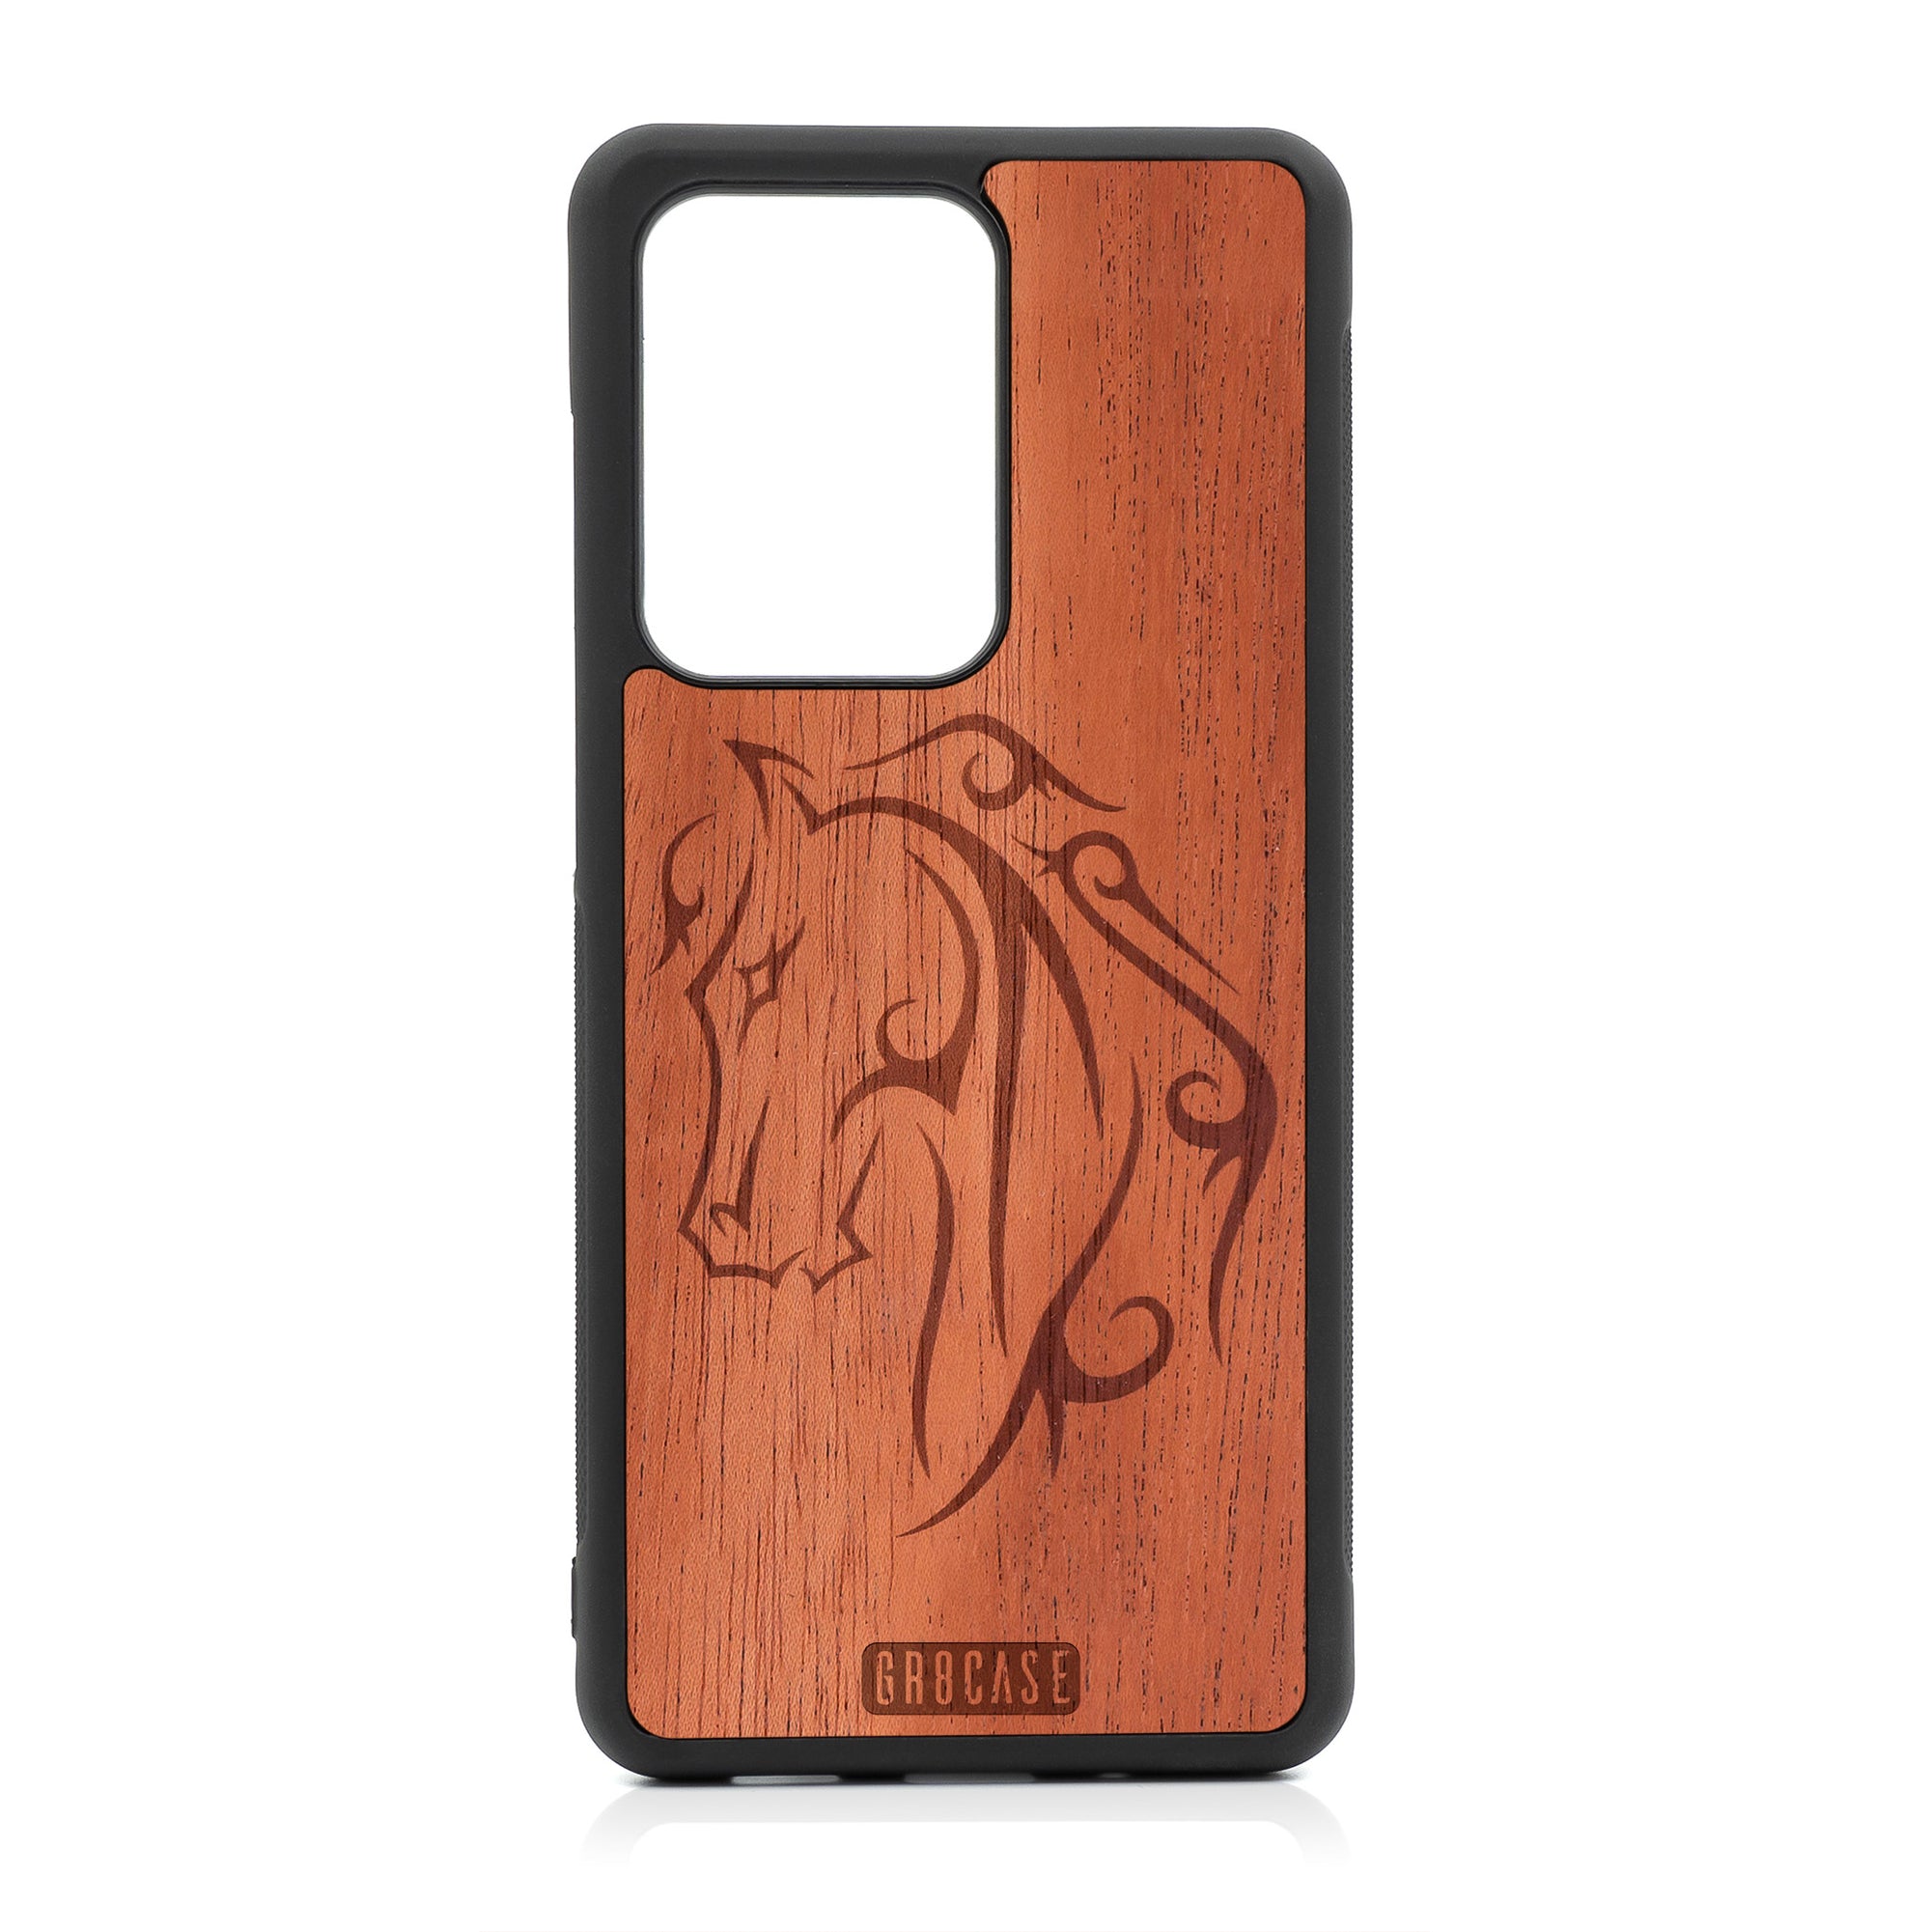 Horse Tattoo Design Wood Case For Samsung Galaxy S20 Ultra by GR8CASE